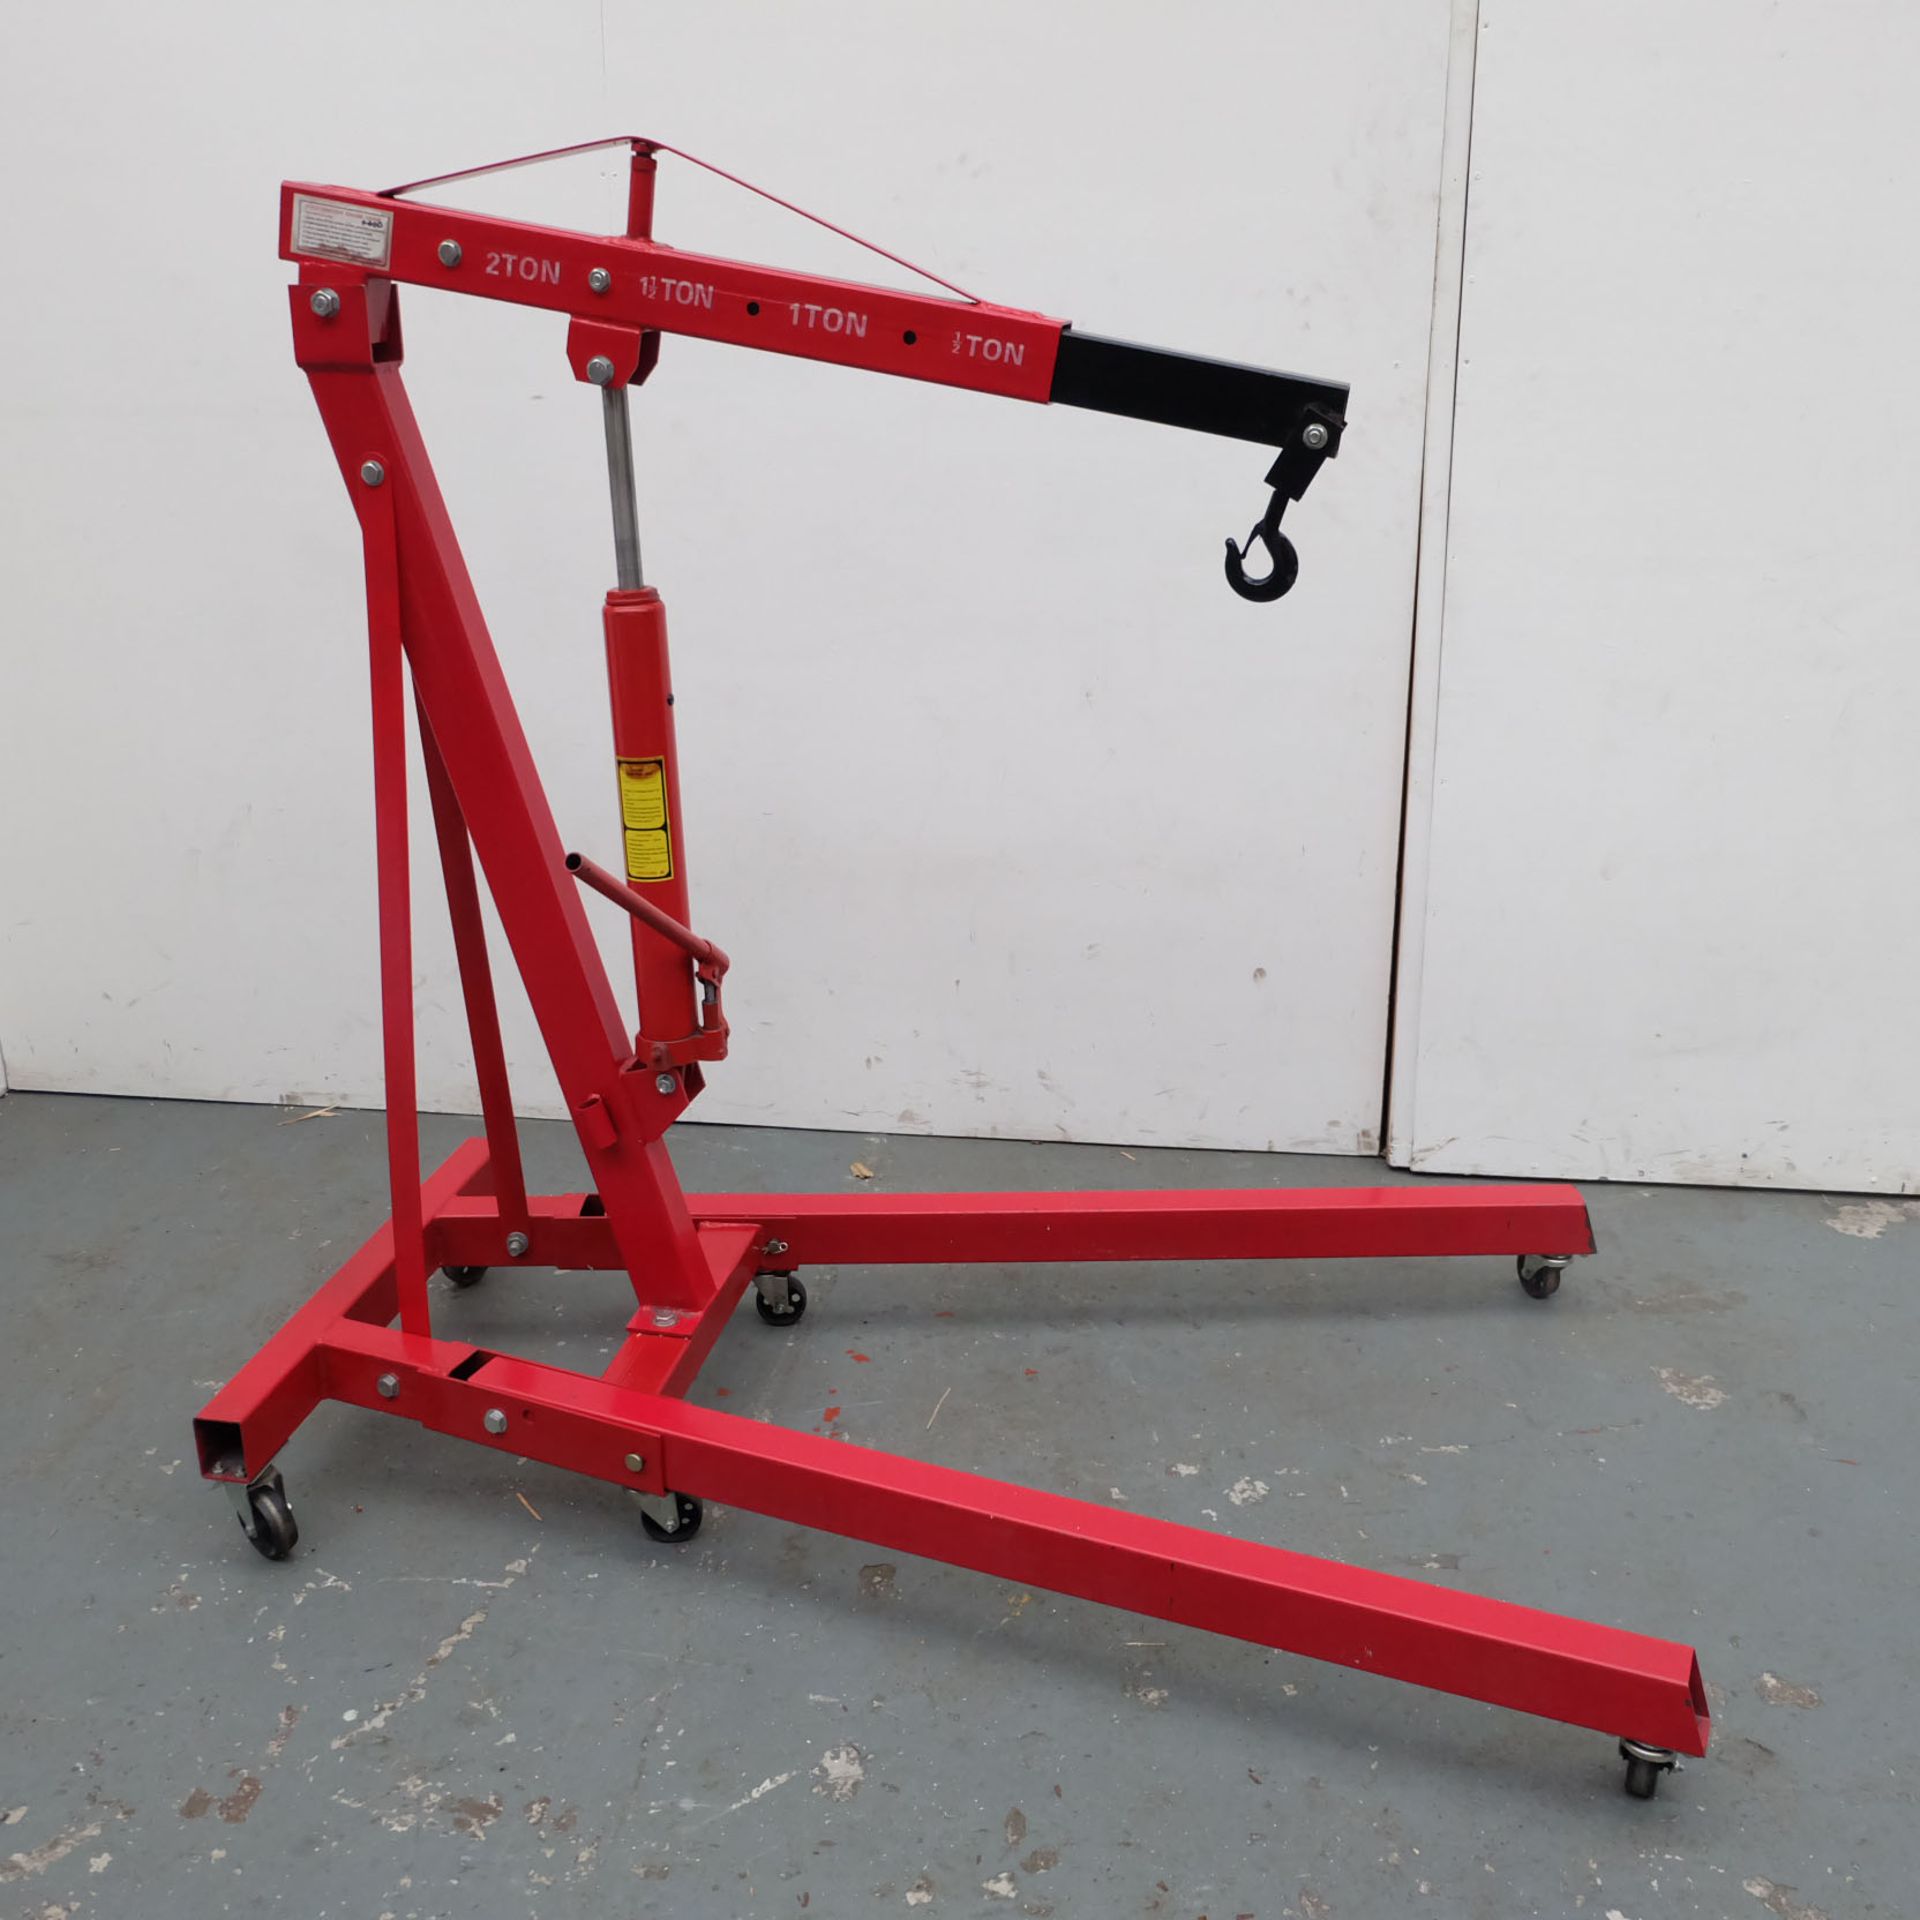 2 Ton Automotive Engine Lift. Four Jib Positions. 500Kg Lift With Jib Fully Extended.